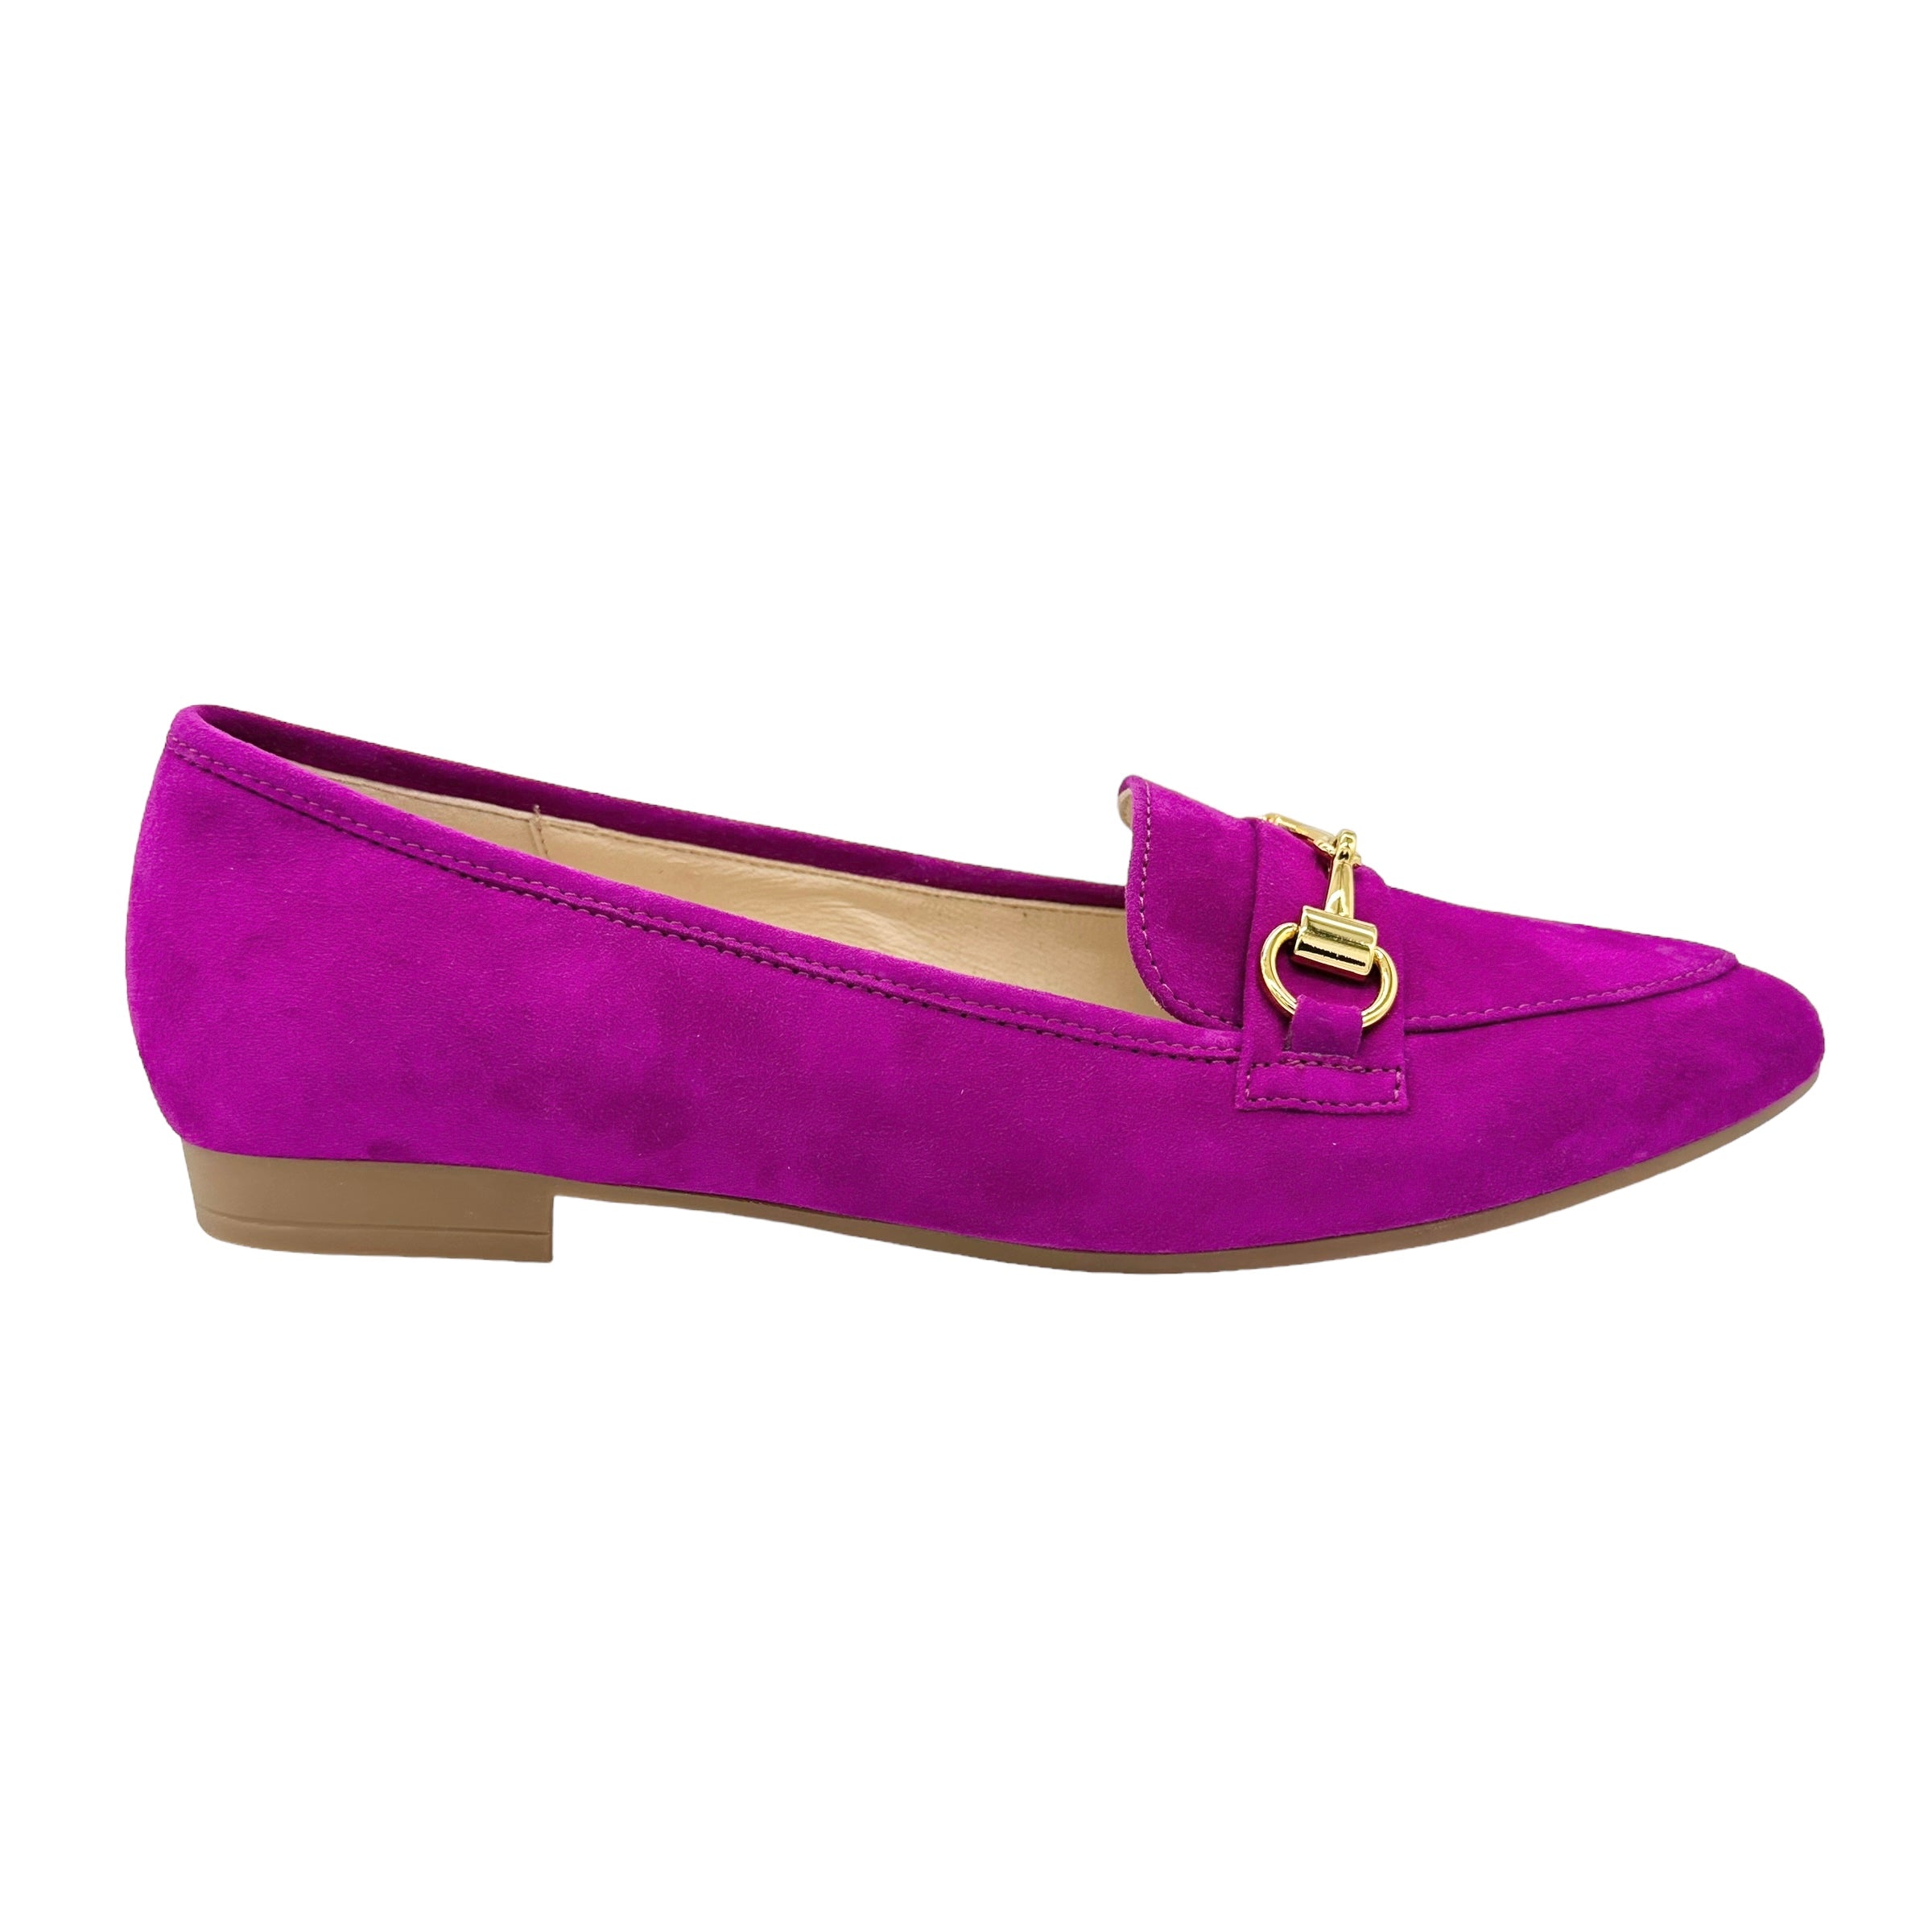 Gabor Caterham 31.302 soft loafer in supple orchid suede, gold snaffle ...